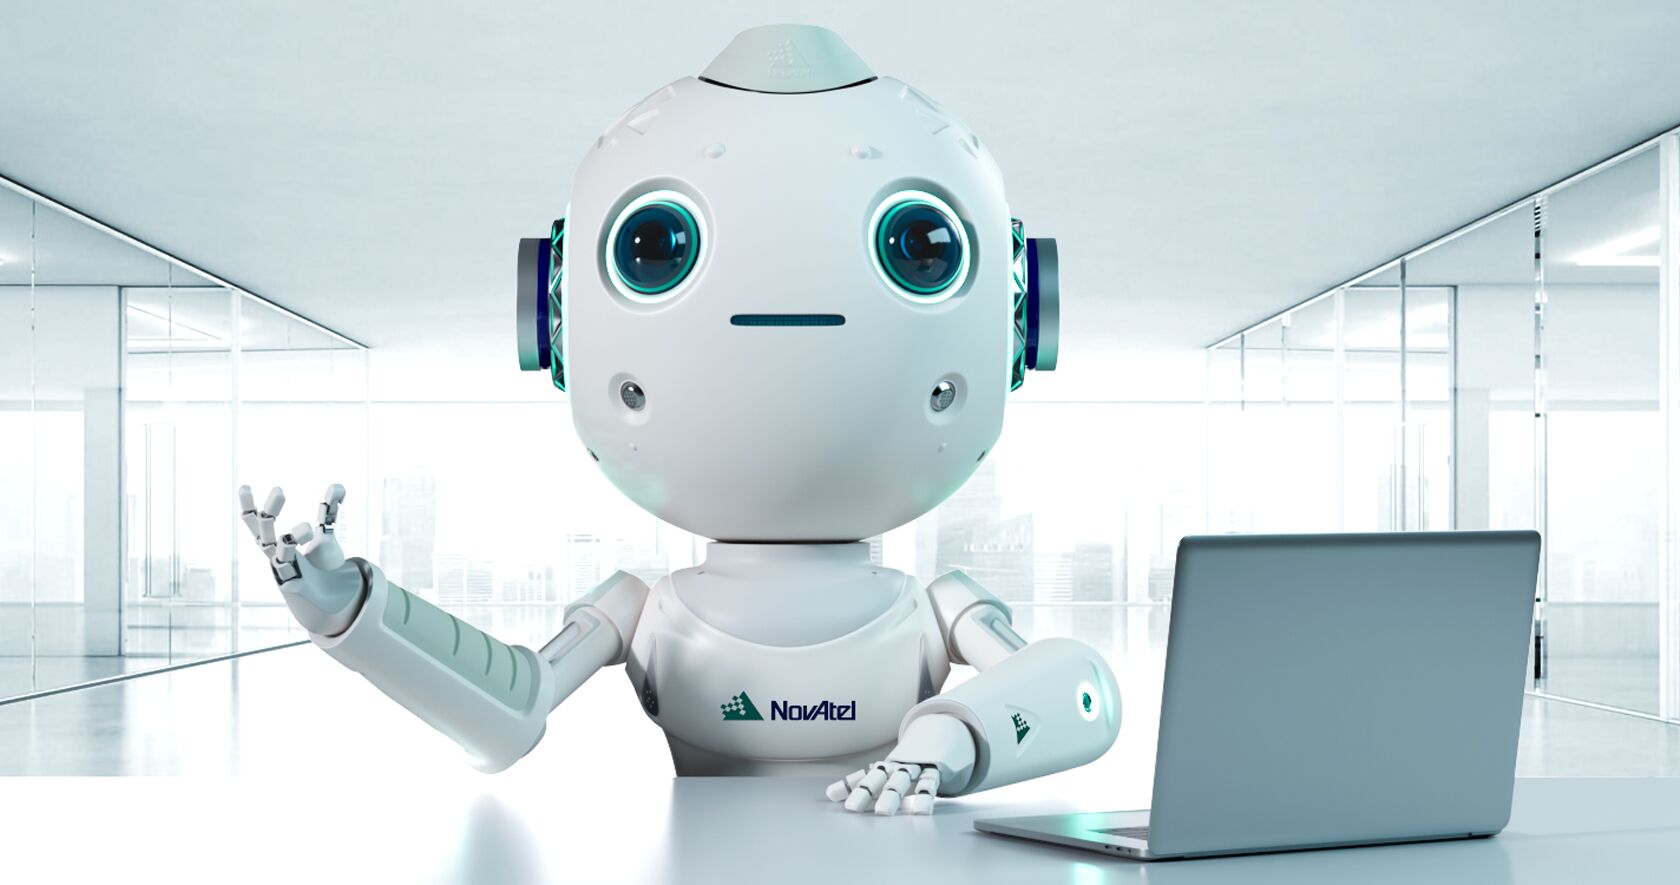 A NovAtel branded white robot with blue eyes named EDIE sitting at a desk with a laptop.